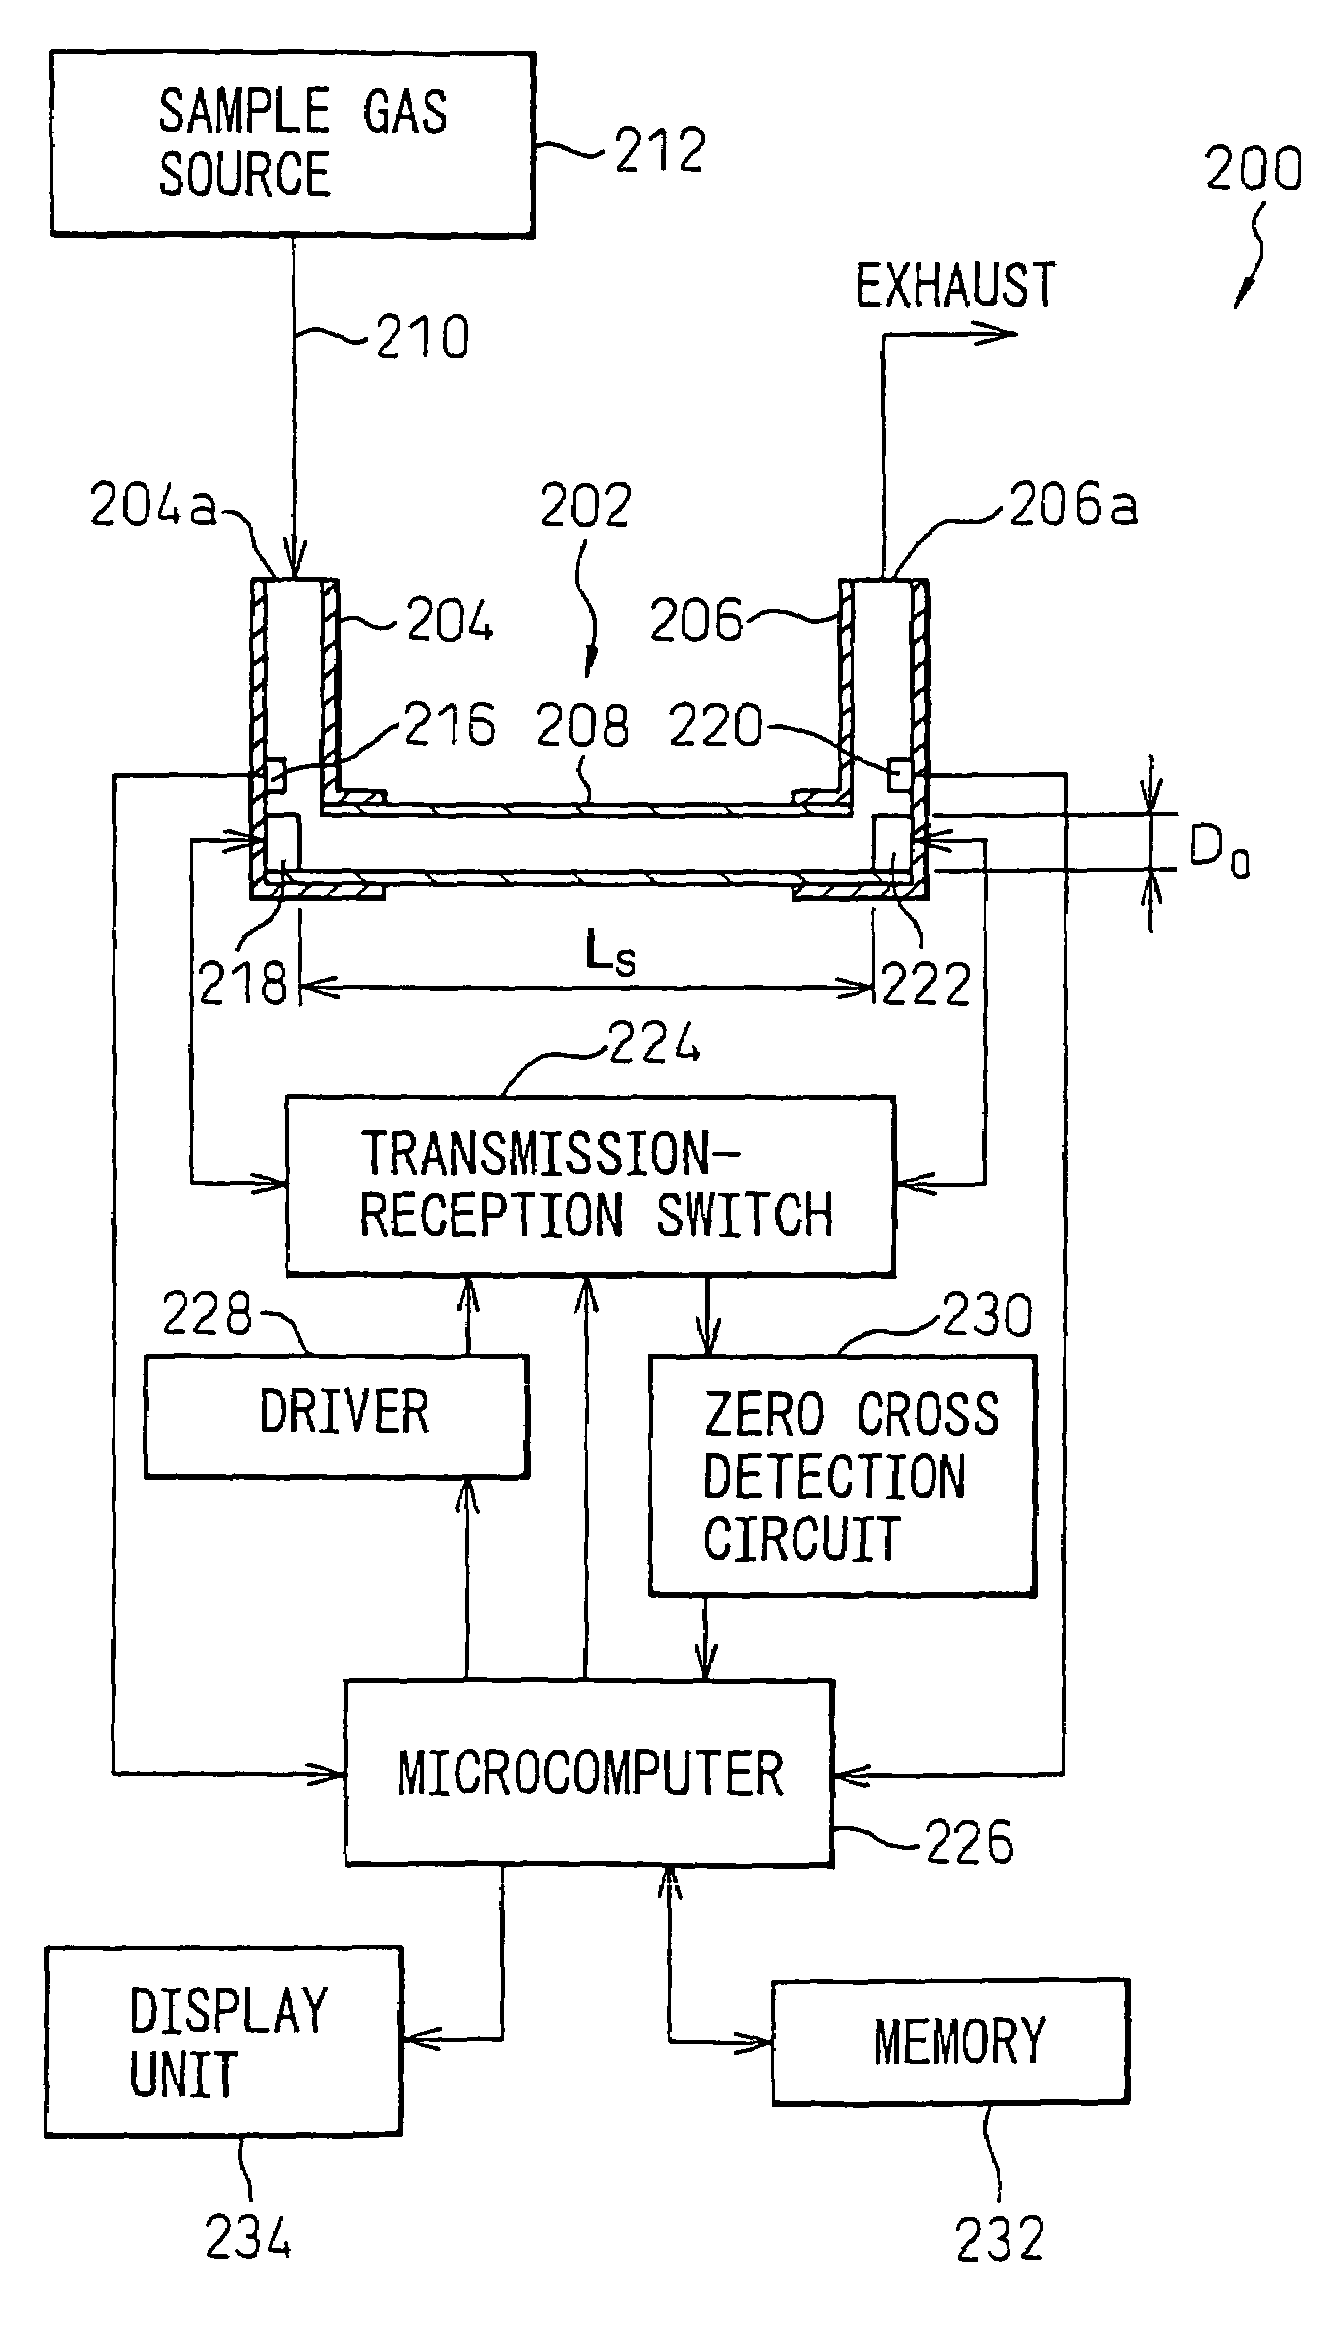 Ultrasonic apparatus and method for measuring the concentration and flow rate of gas